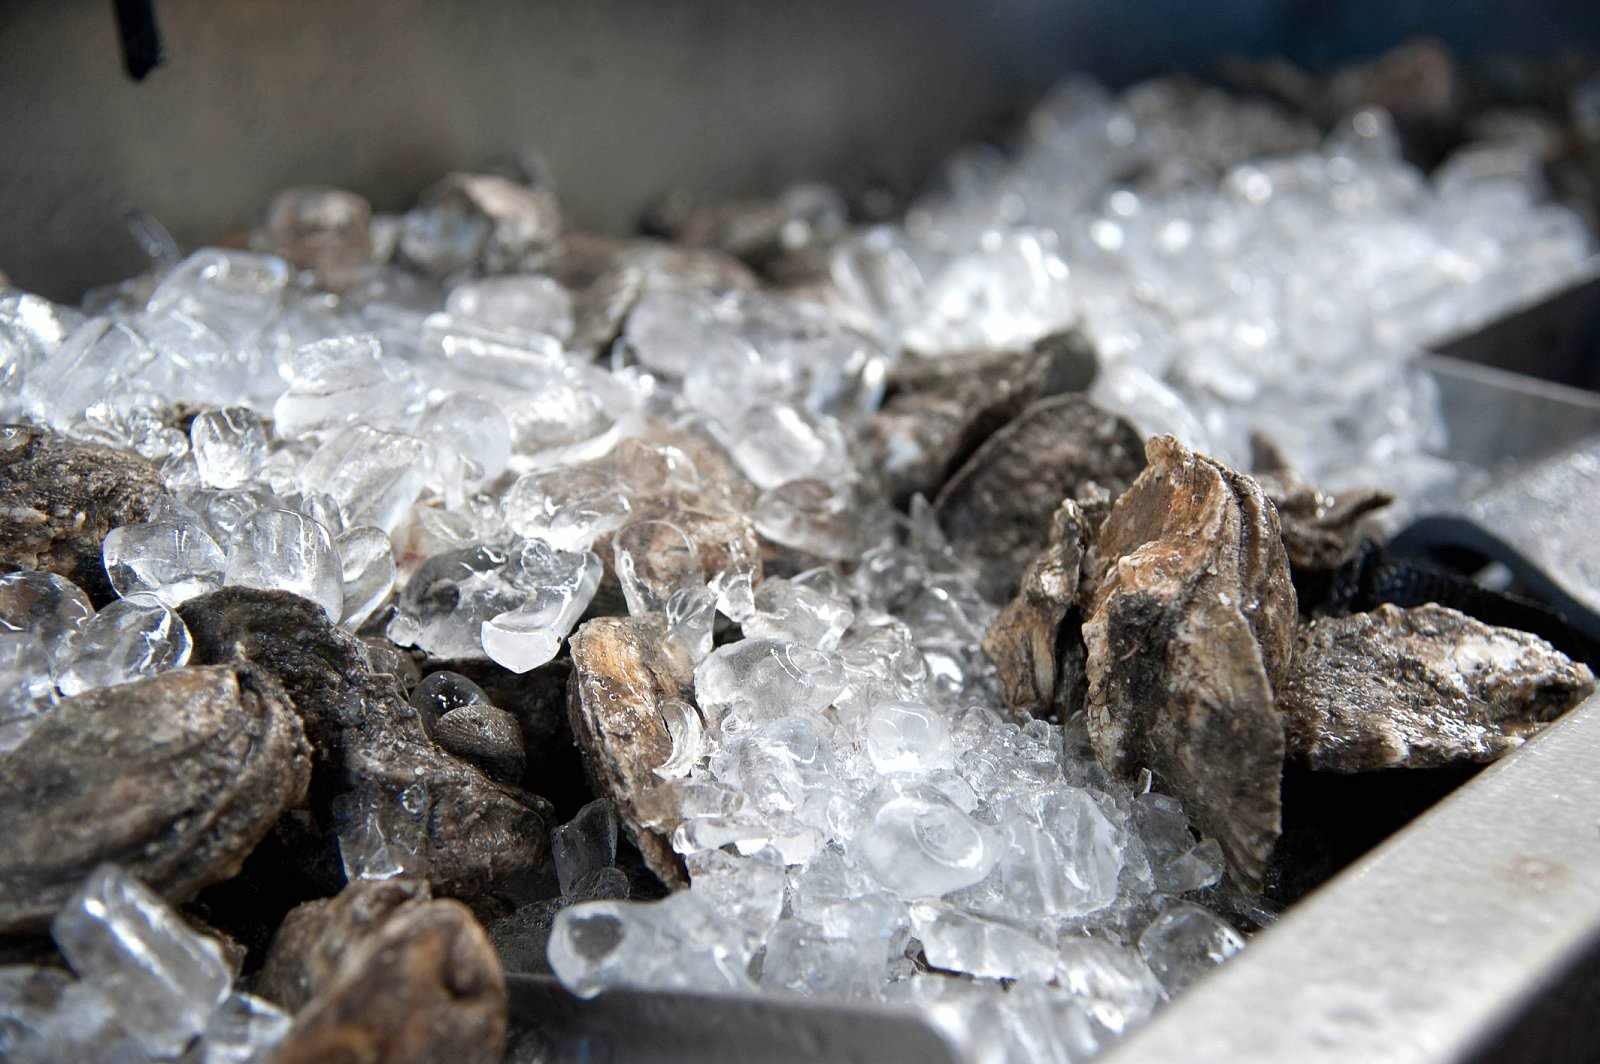 Oyster Festival, Saturday and Sunday at Riverfront